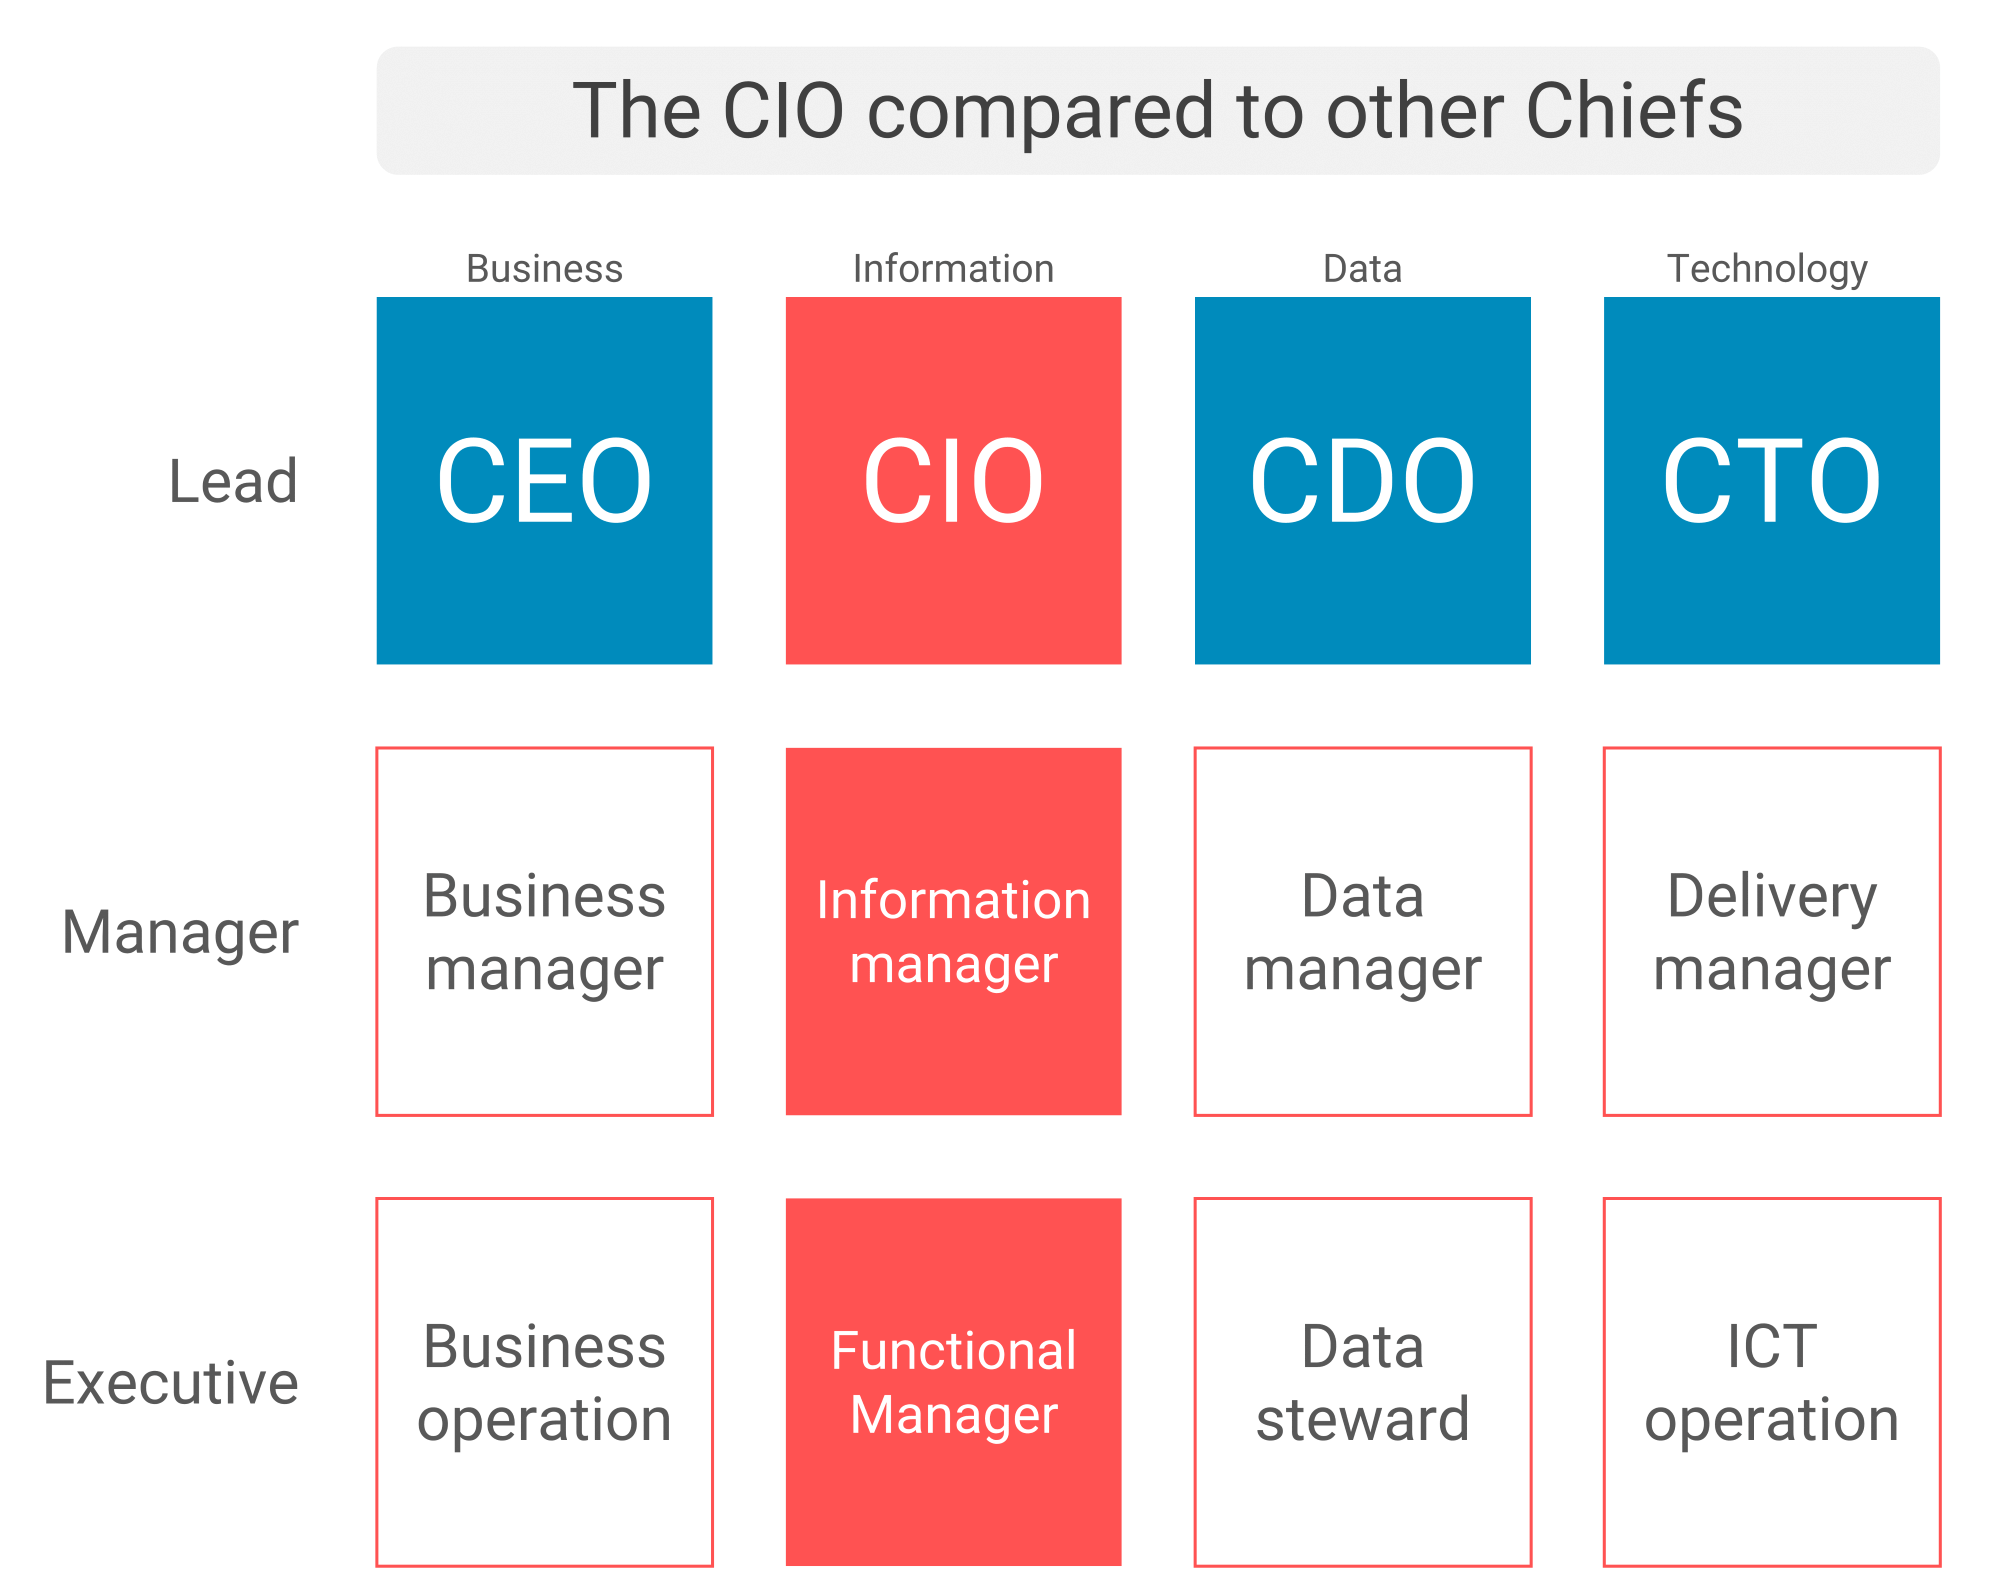 The CIO compares to other chiefs